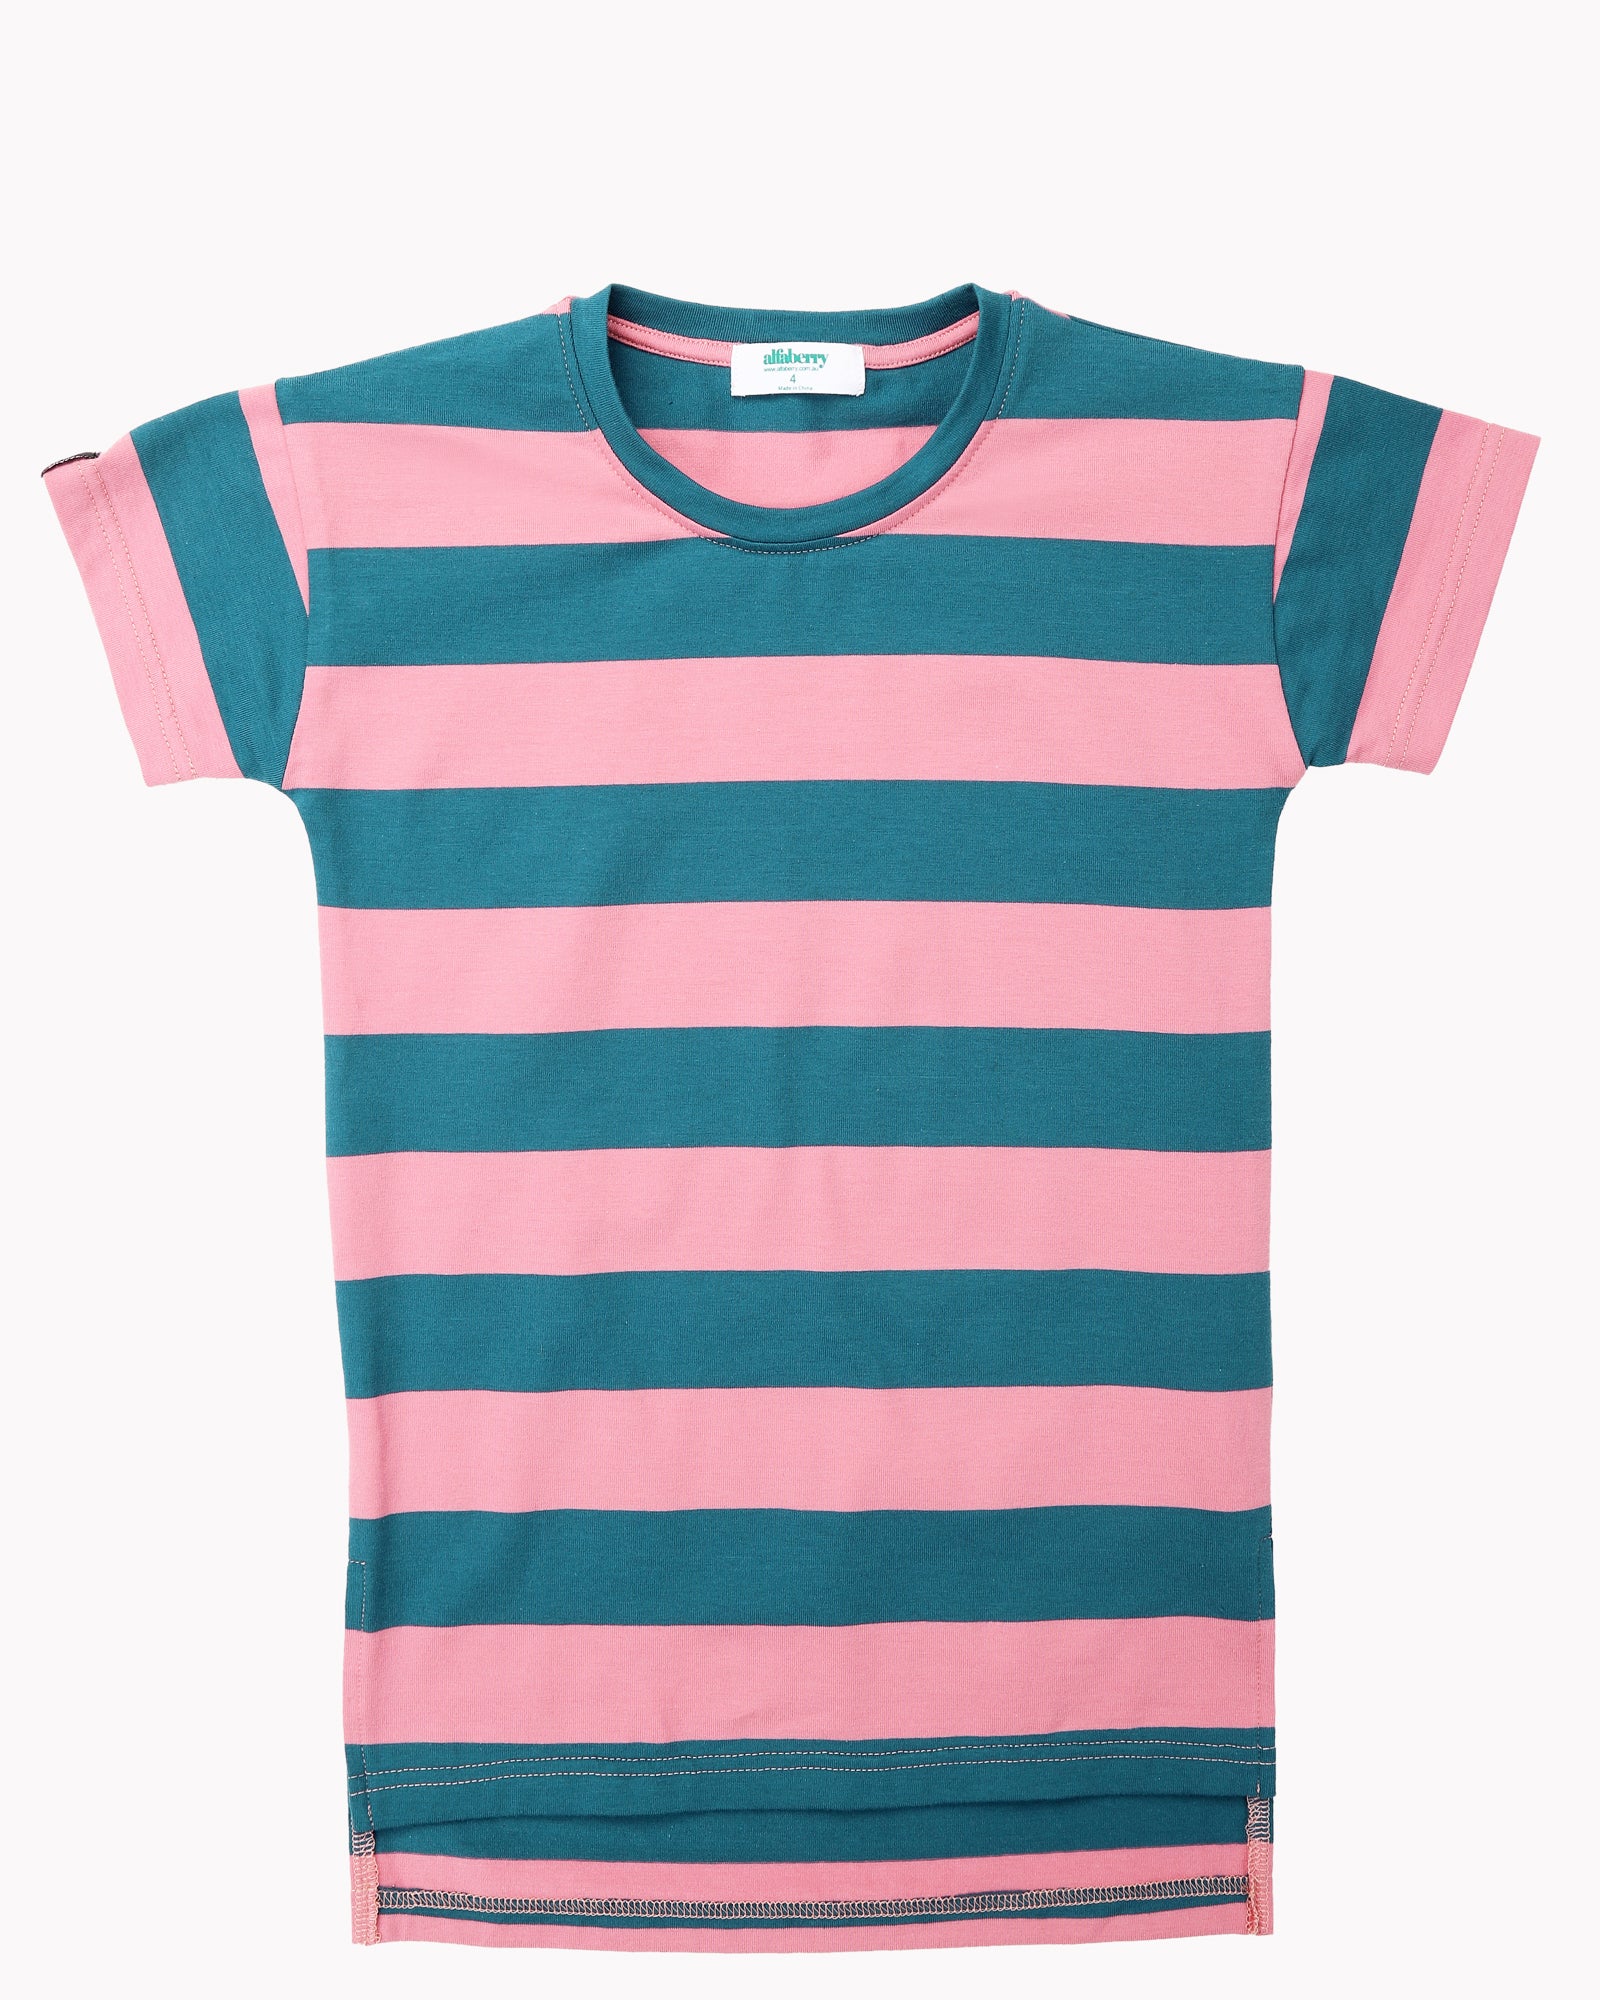 Wide Stripes T-Shirt Dress In Teal and Pink Front